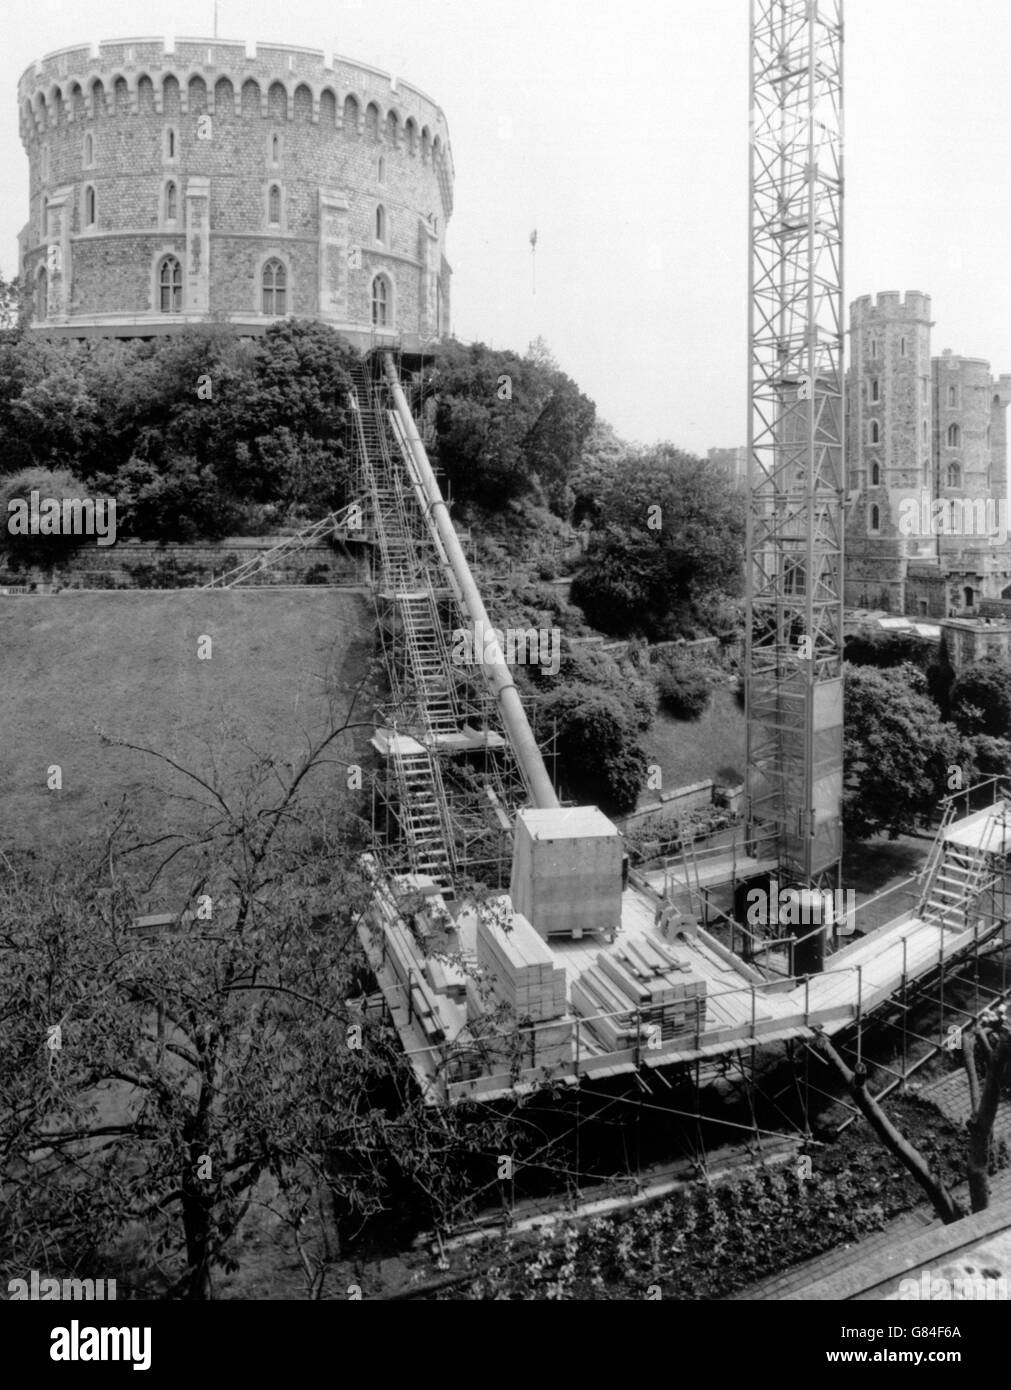 The scaffolding and debris chute built to enable repair work on the Keep of Windsor Castle, which was damaged after heavy rain in January 1988. Stock Photo